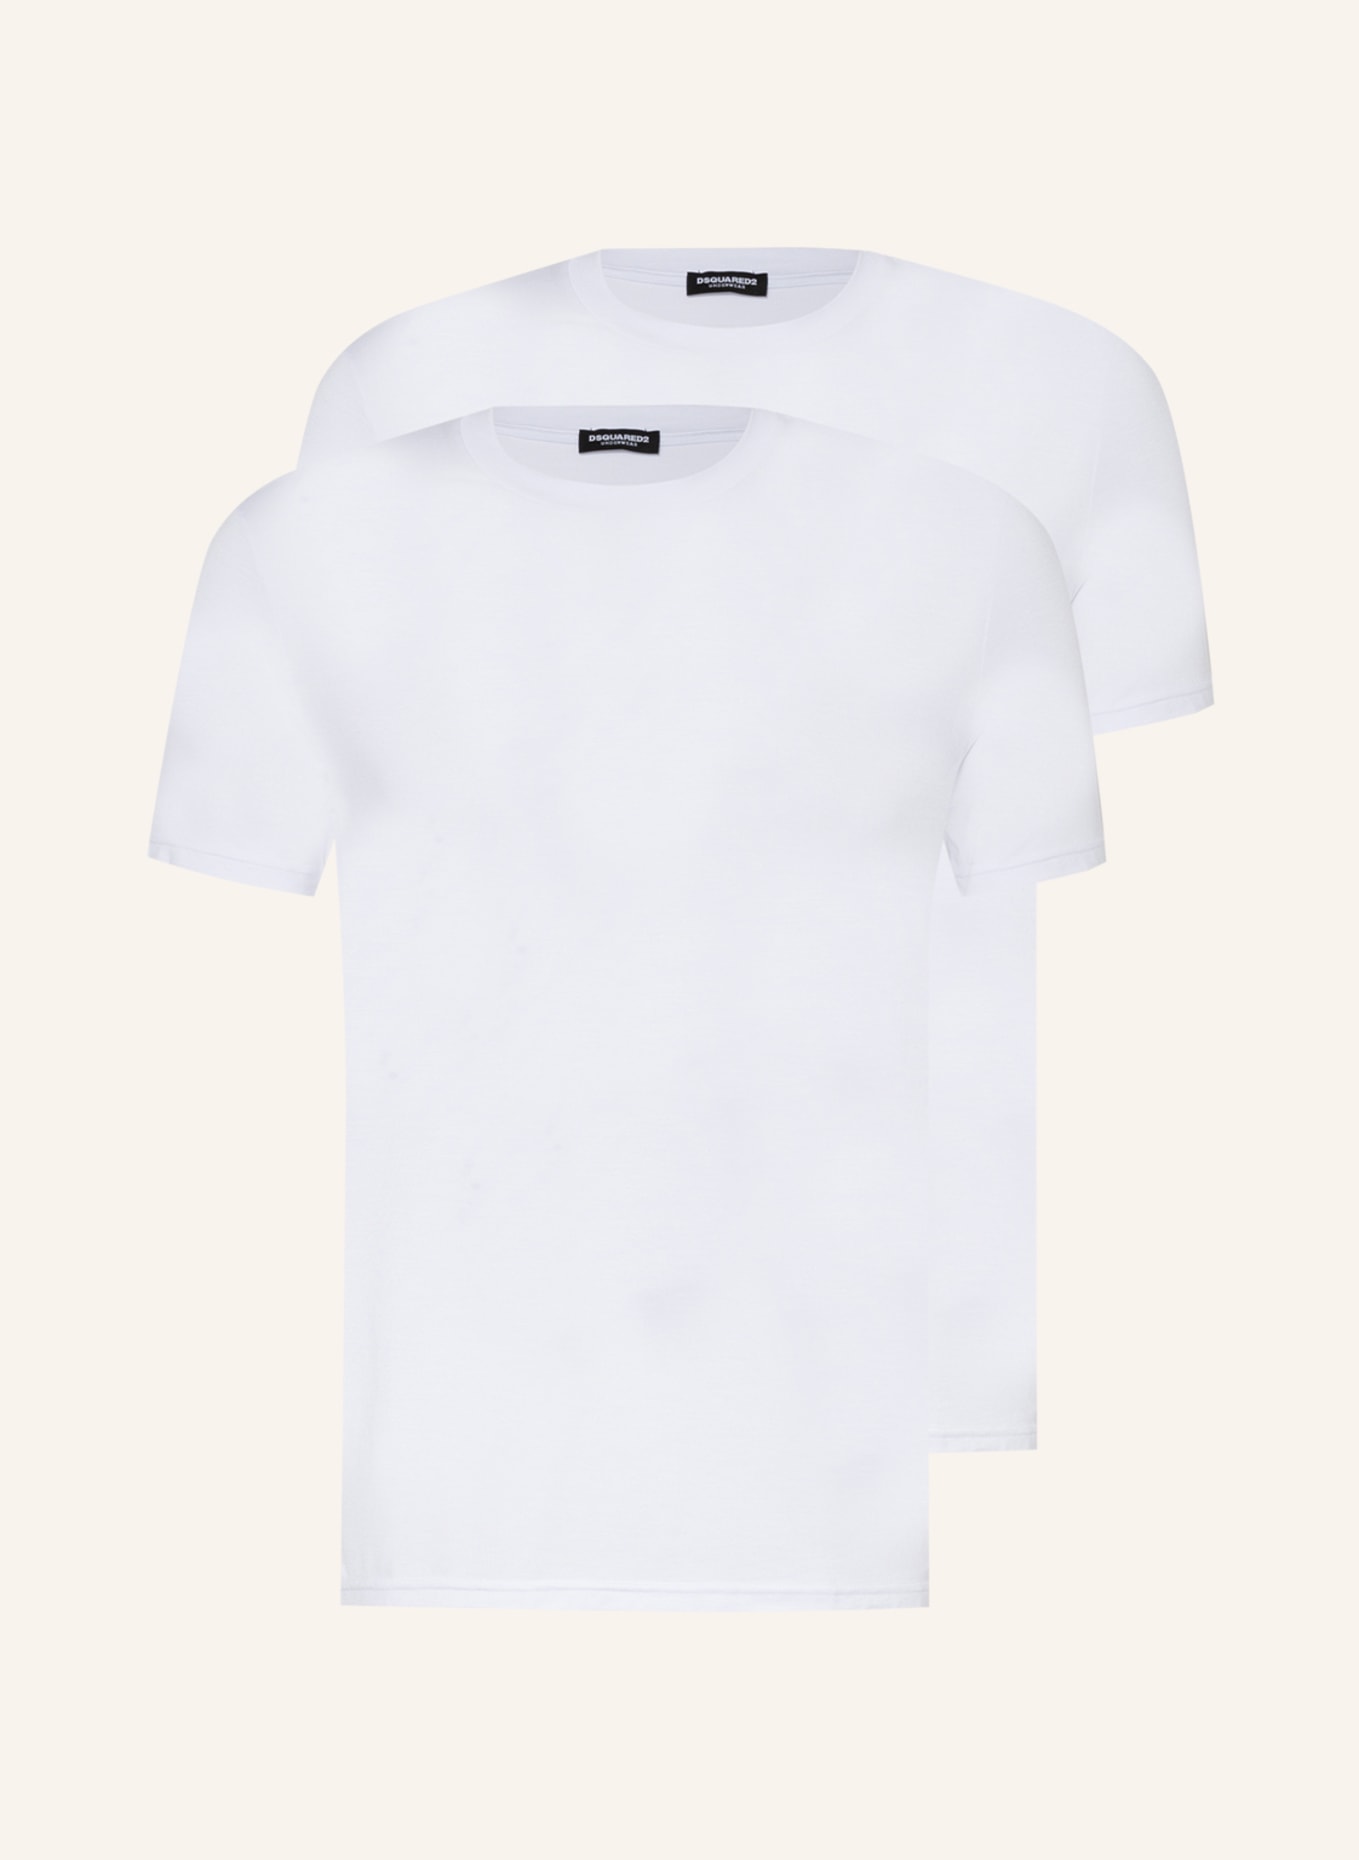 DSQUARED2 2er-Pack T-Shirts , Farbe: WEISS (Bild 2)